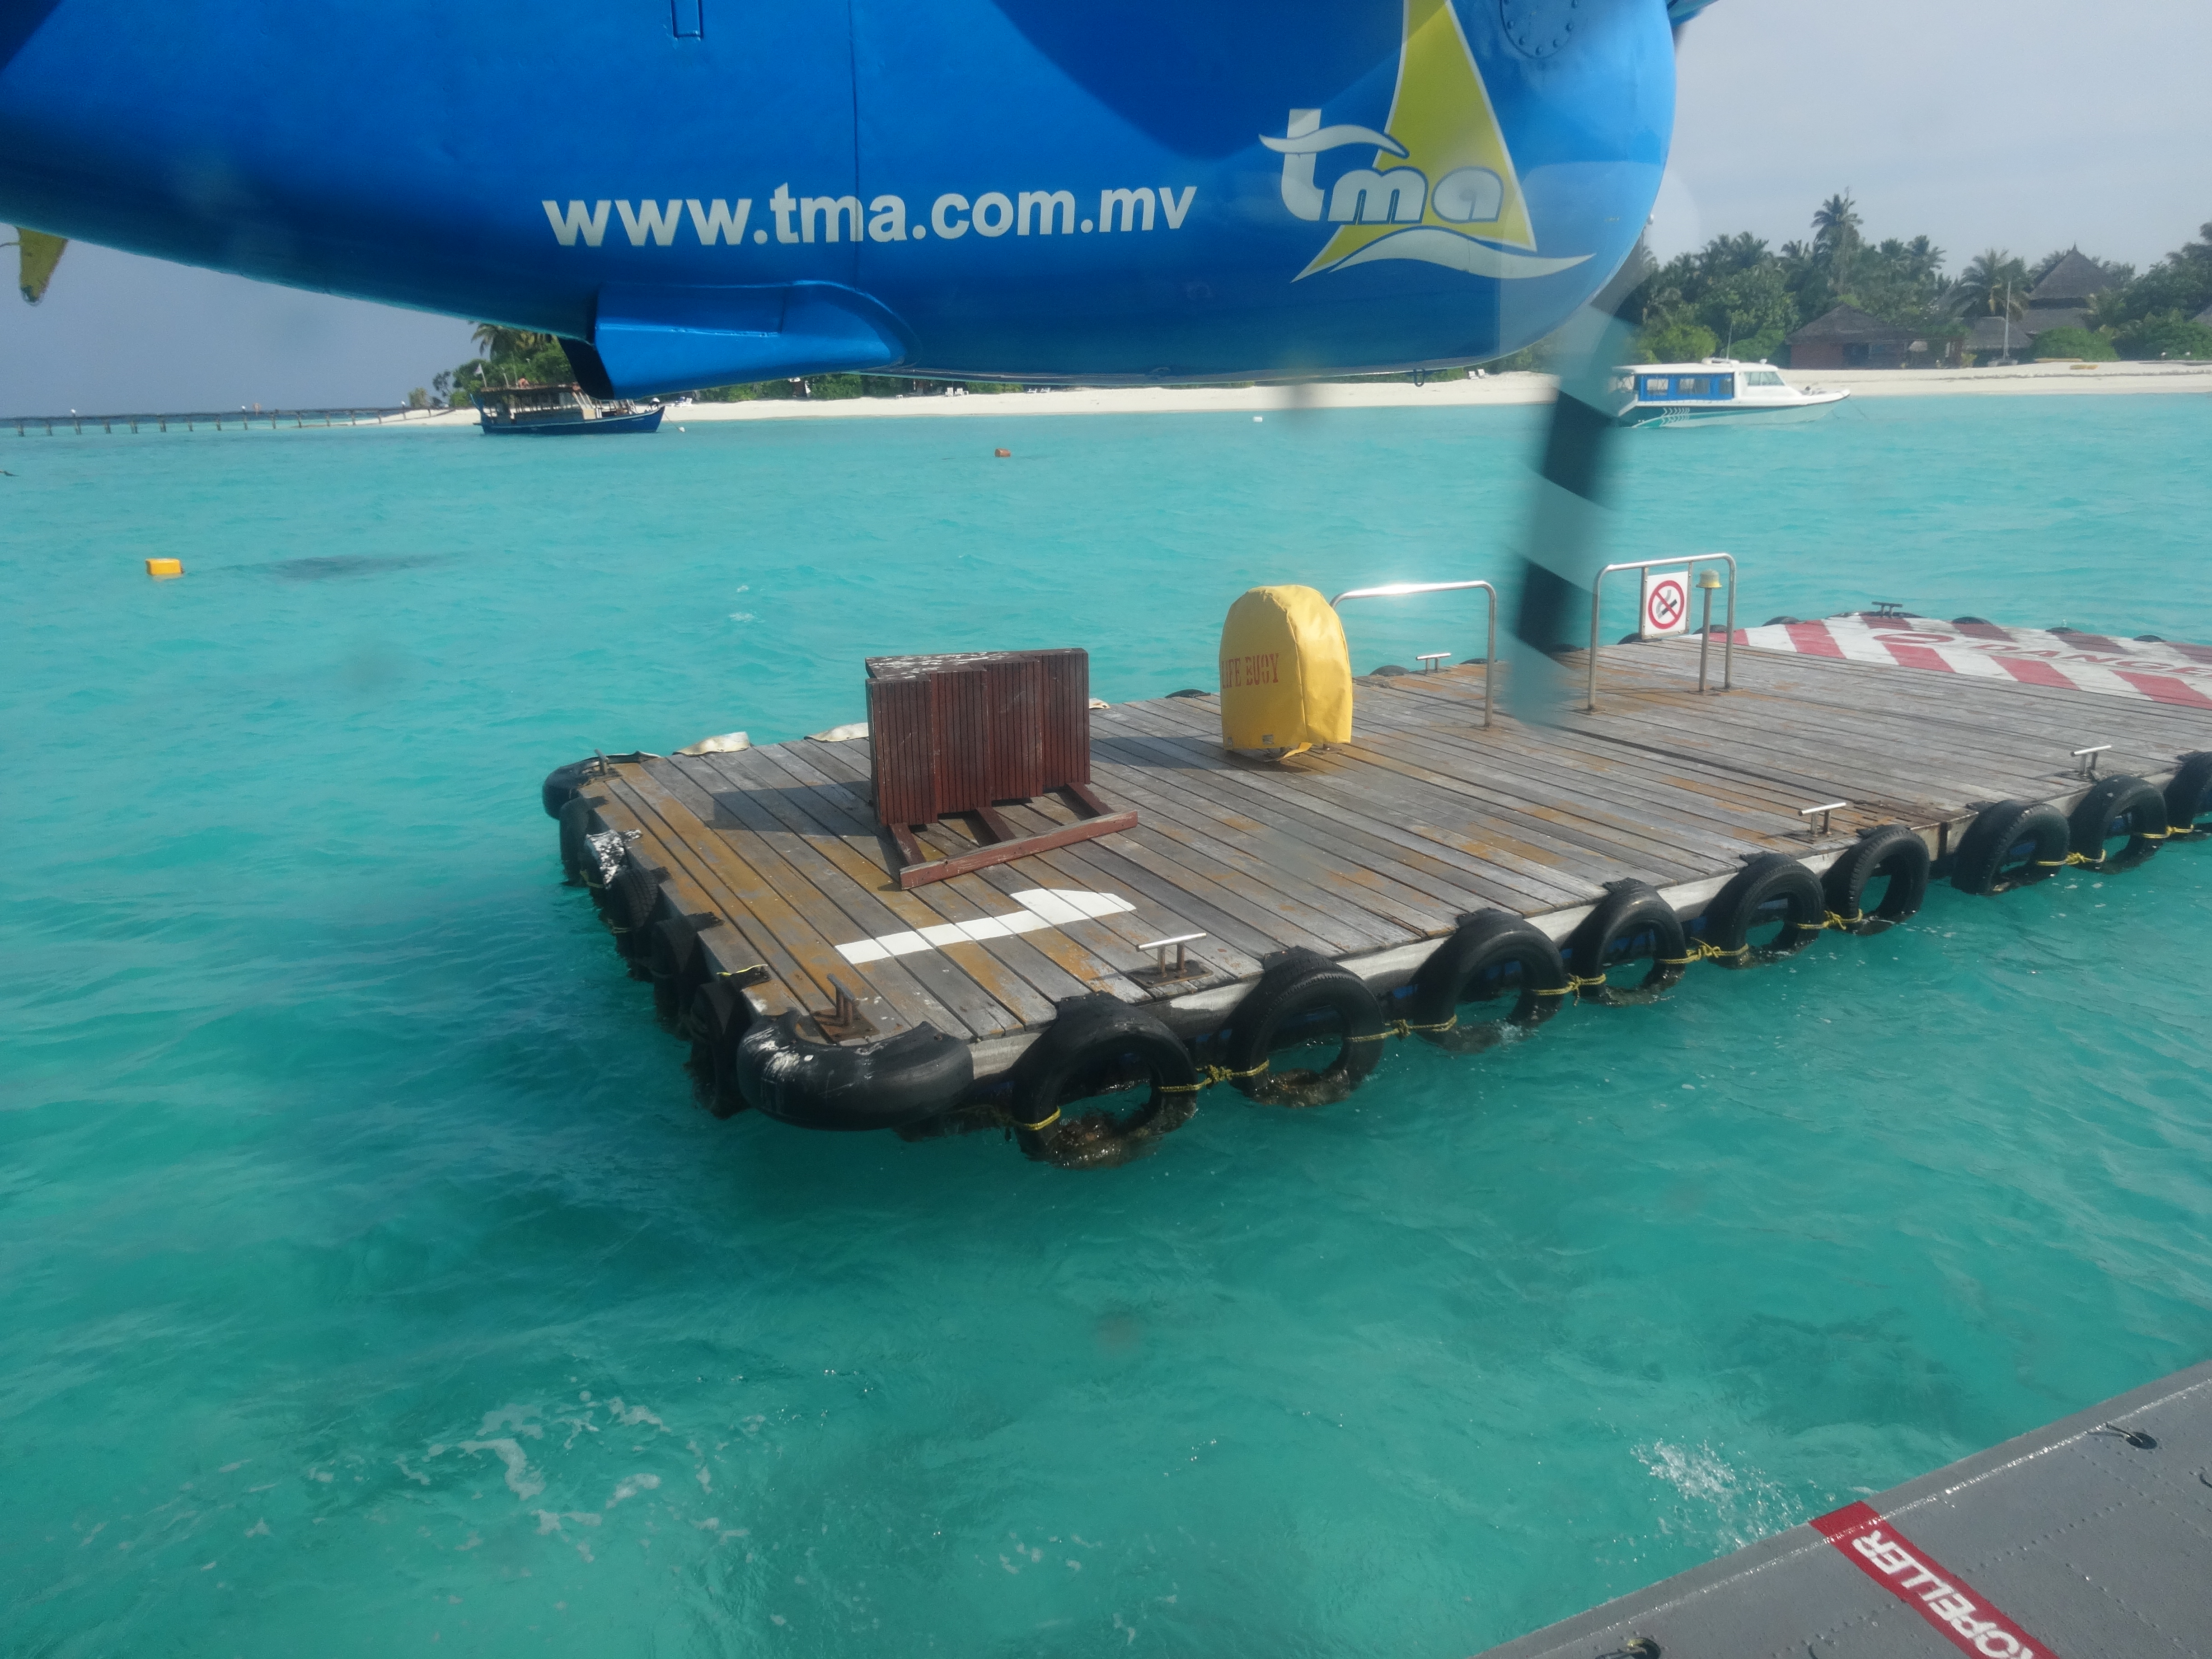 a floating dock with a plane in the background